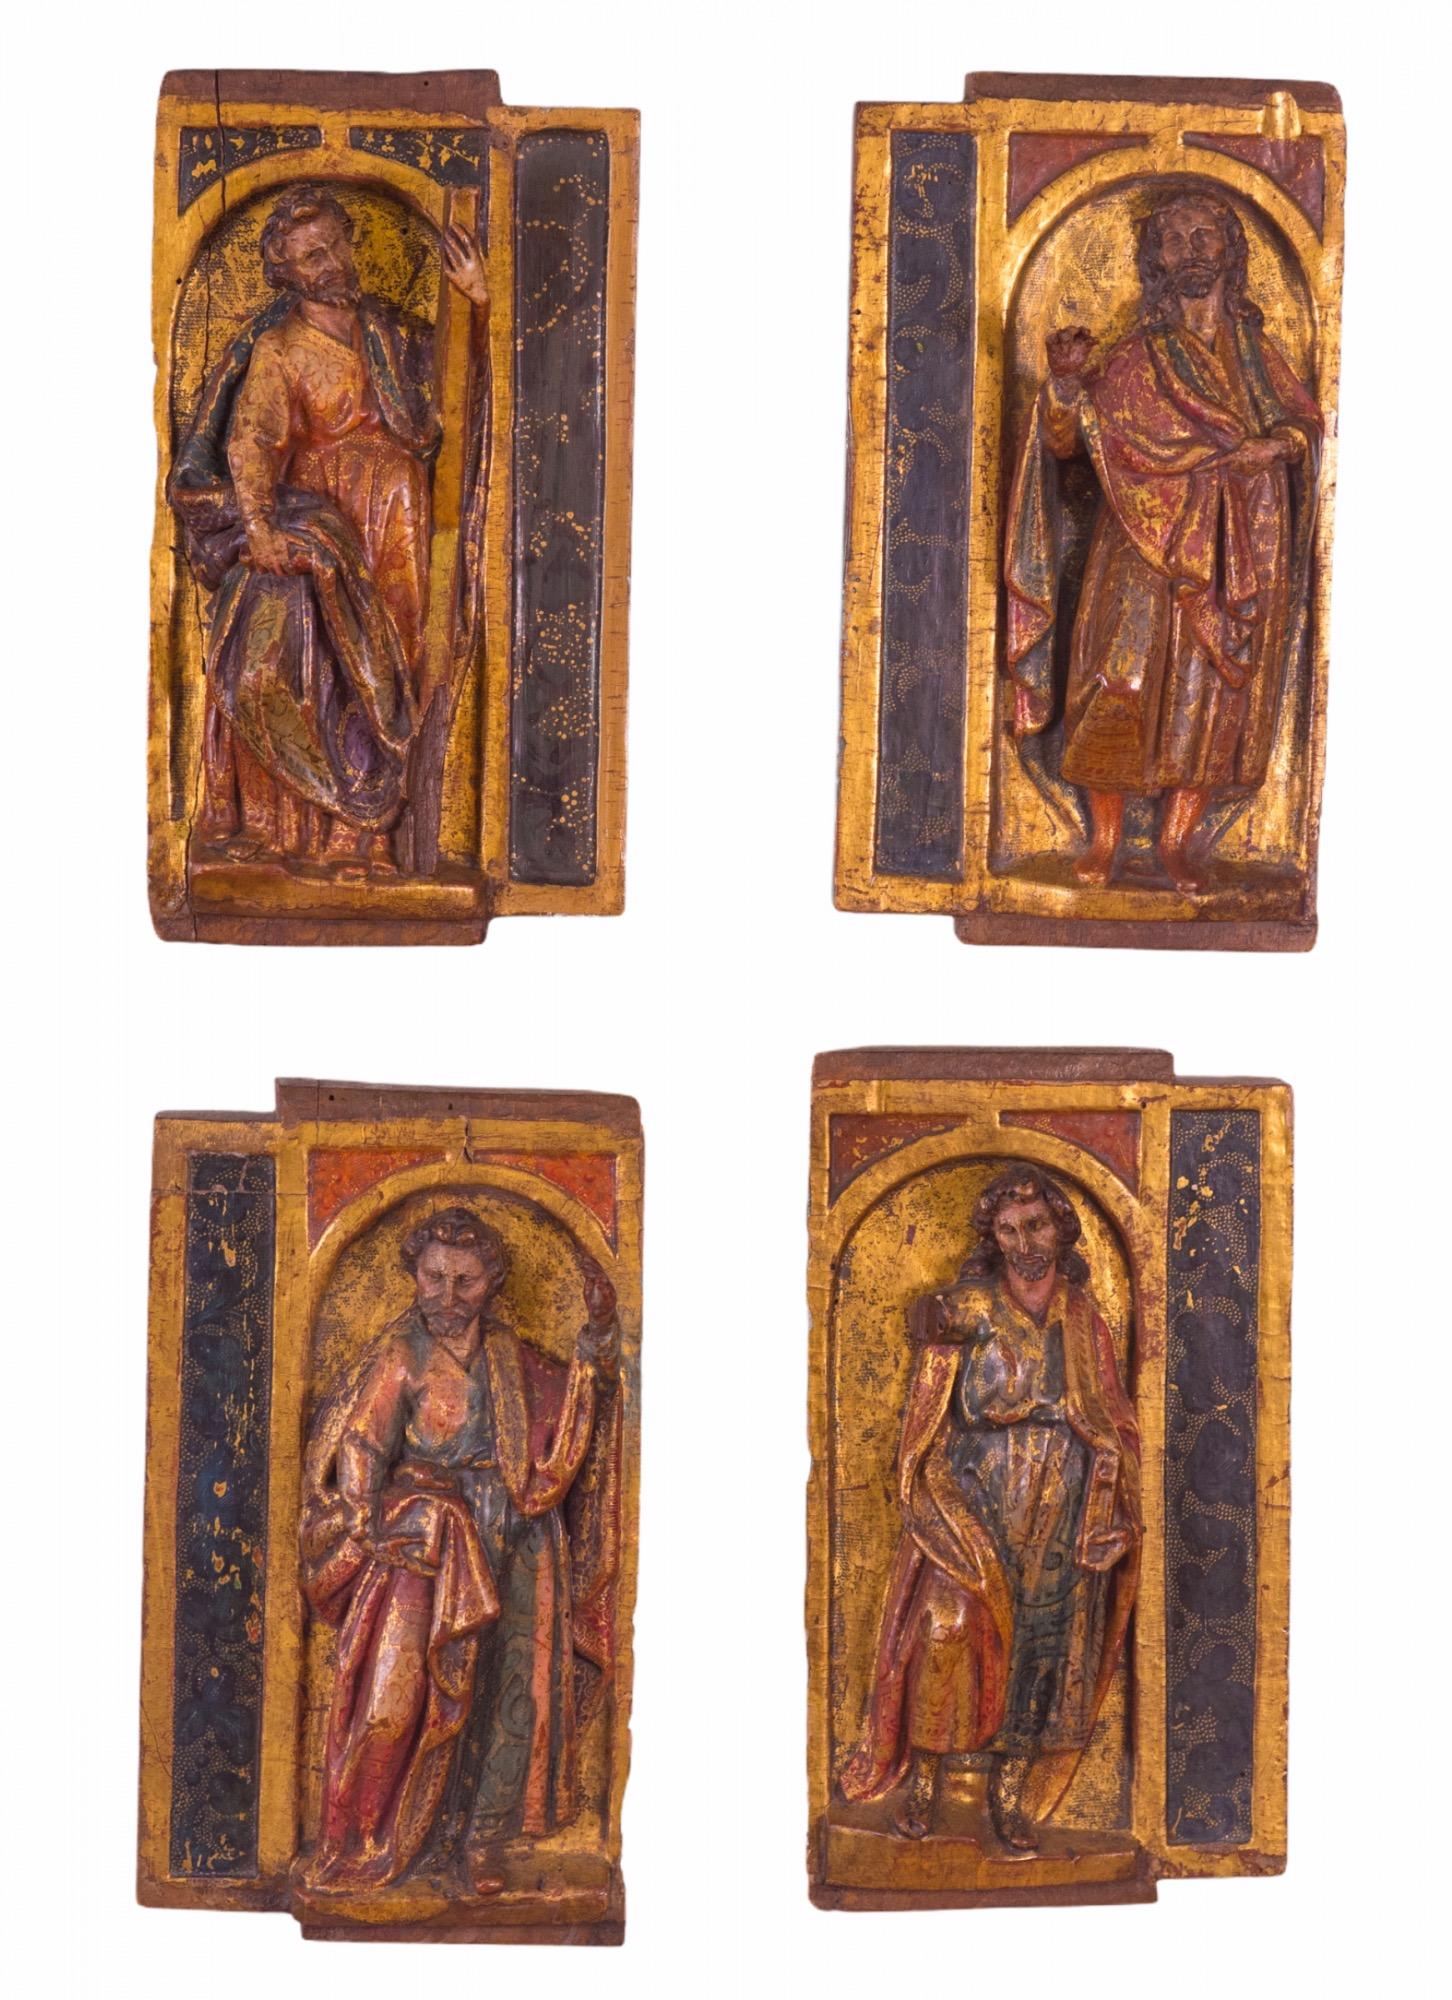 12th Century Spanish (Romanesque Period) gold gilded and polychromed carved-wood plaques of the four Evangelists; Matthew, Mark, Luke, and John, the authors attributed with the creation of the four Gospels in the New Testament. These are mounted on